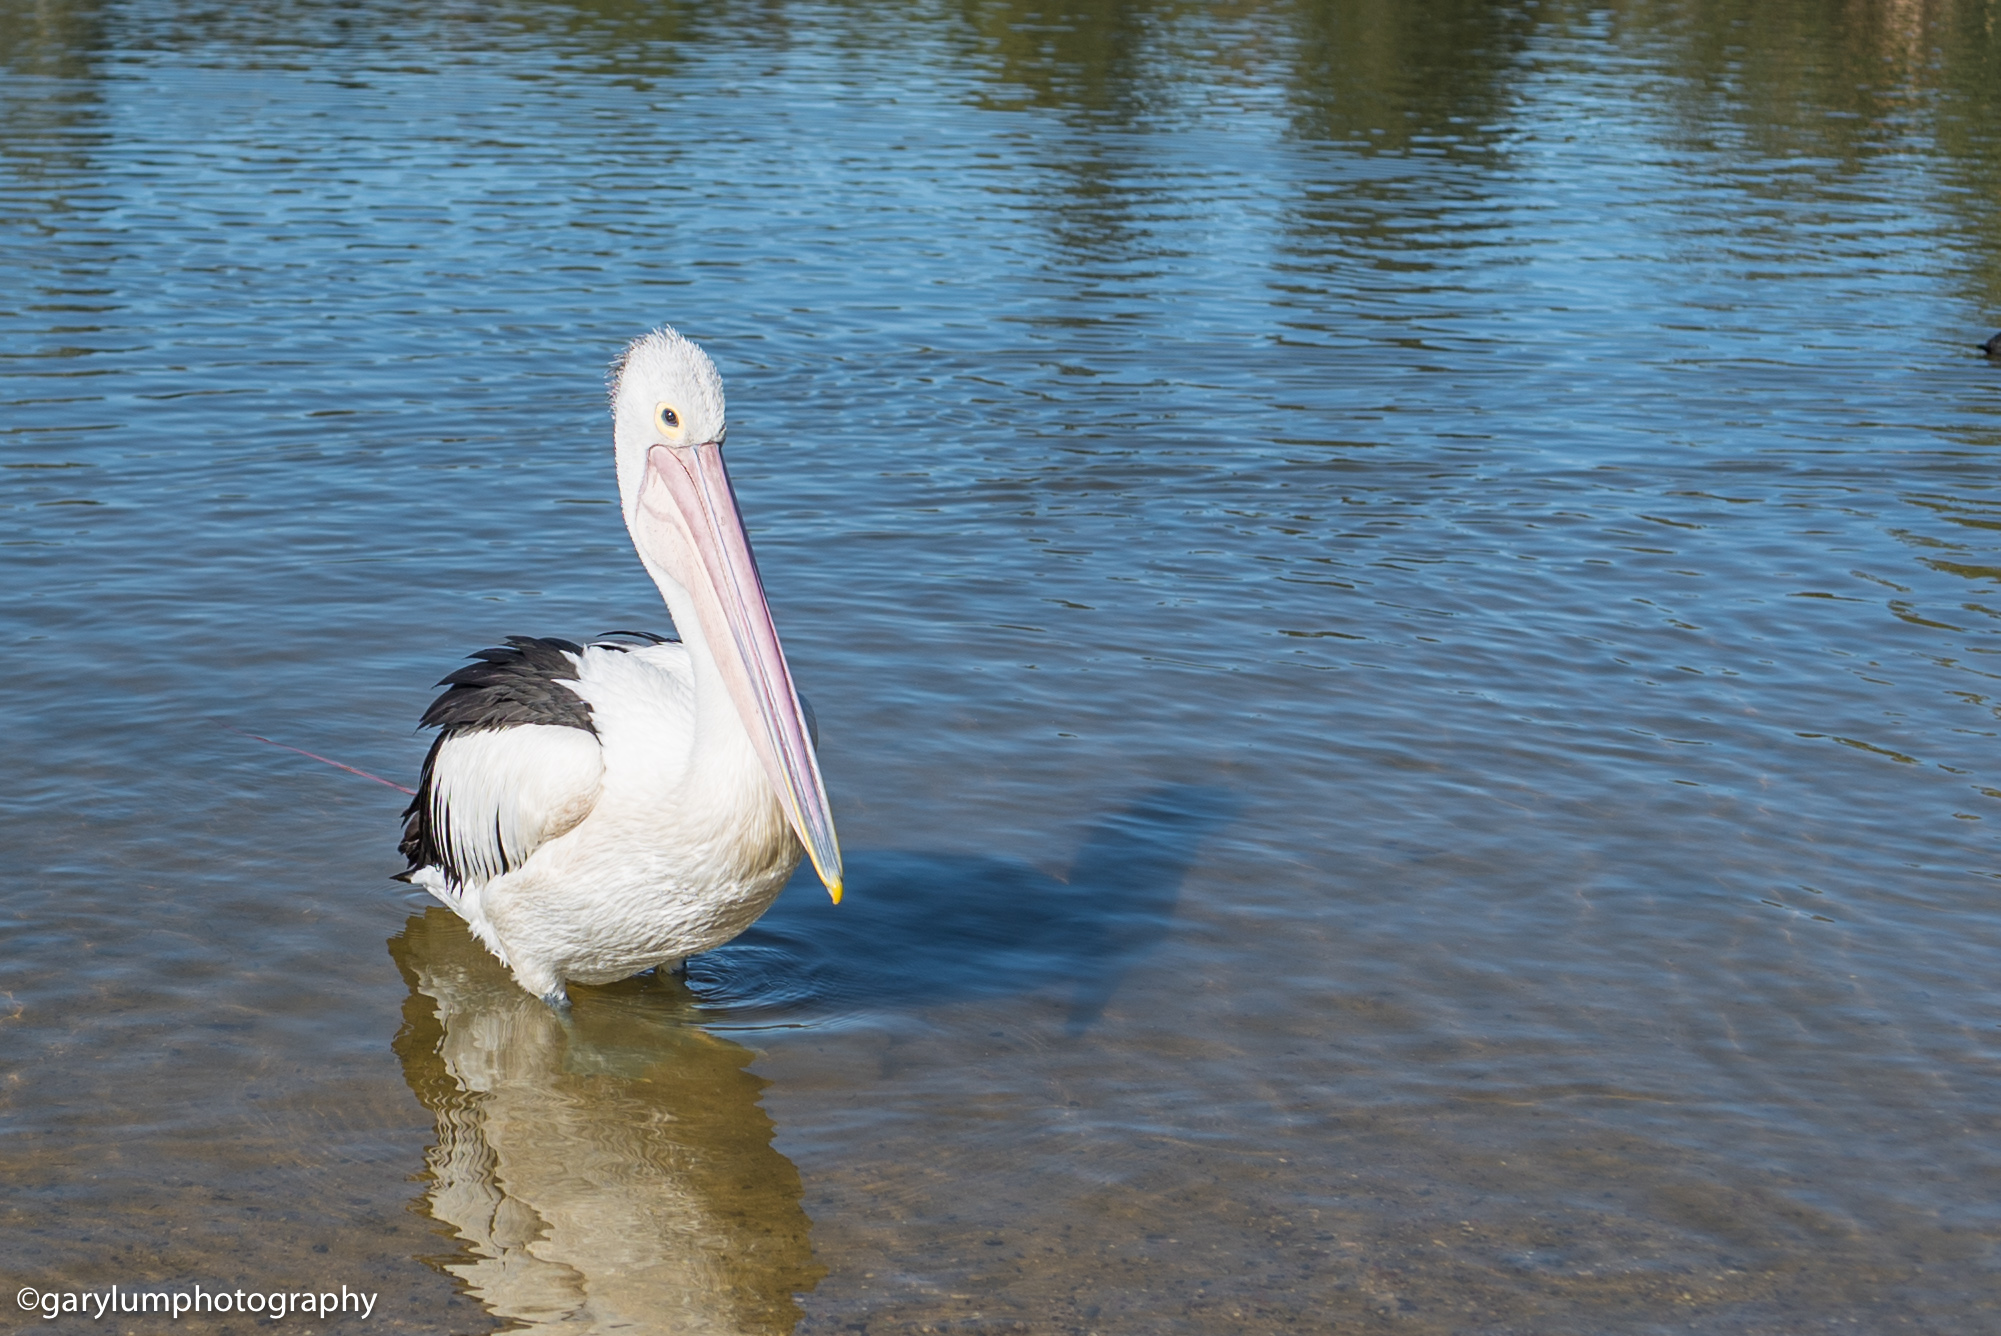 The pelicans have returned after being away since about October last year